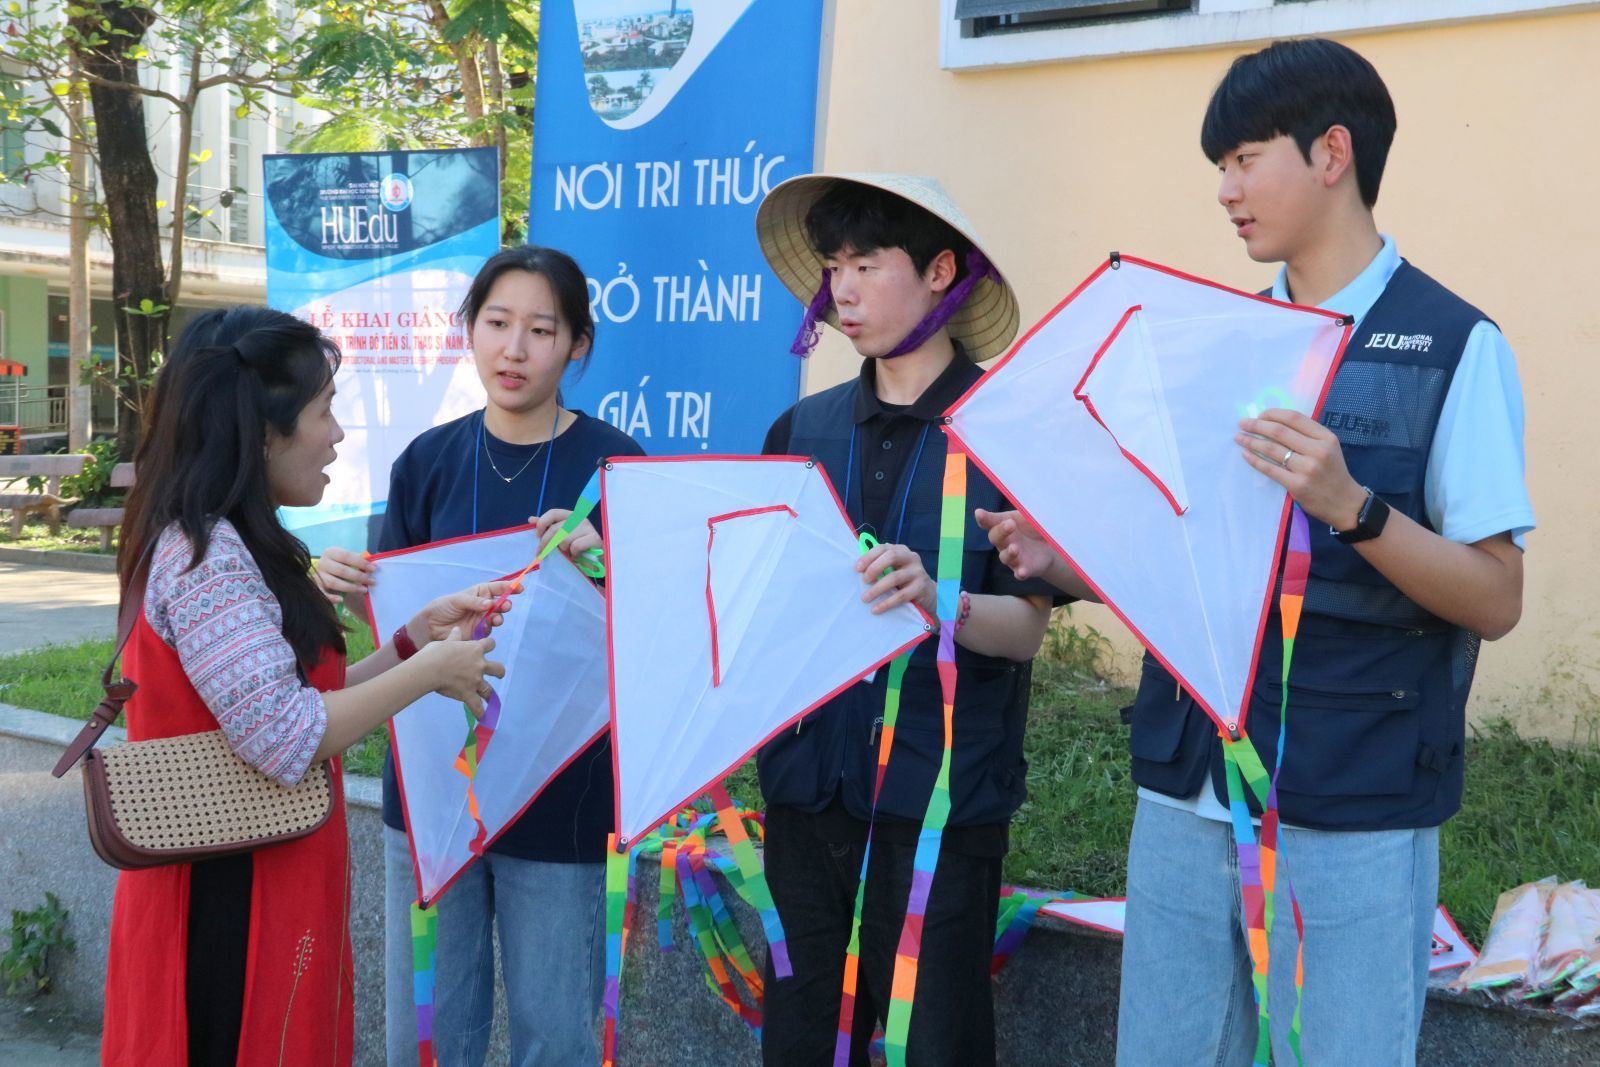 … and sharing about Korean kites with Vietnamese teachers and students